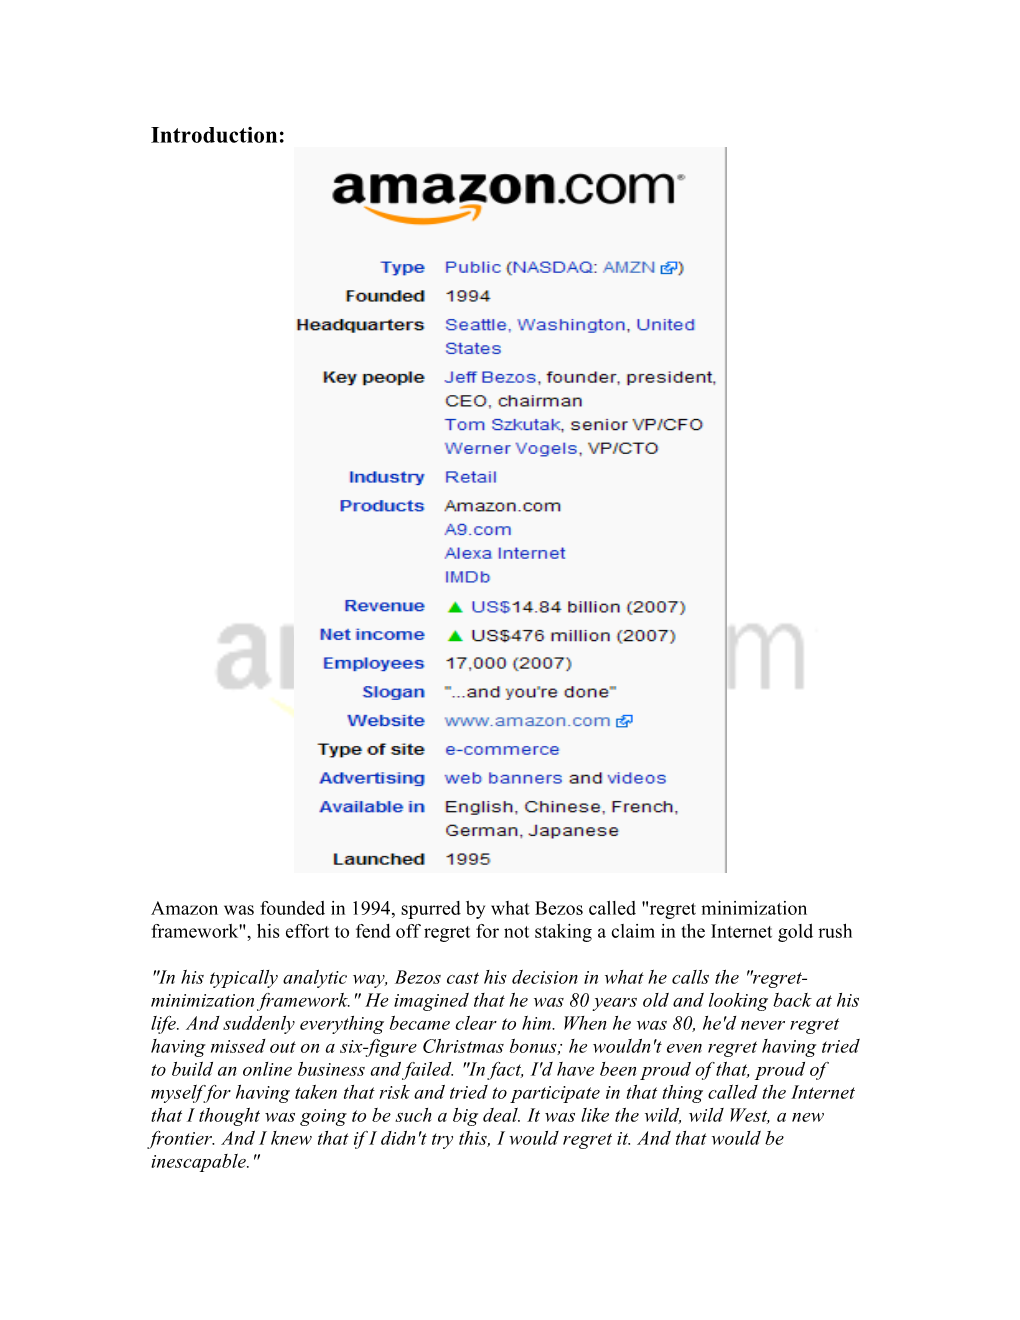 Amazon Was Founded in 1994, Spurred by What Bezos Called "Regret Minimization Framework", His Effort to Fend Off Regre